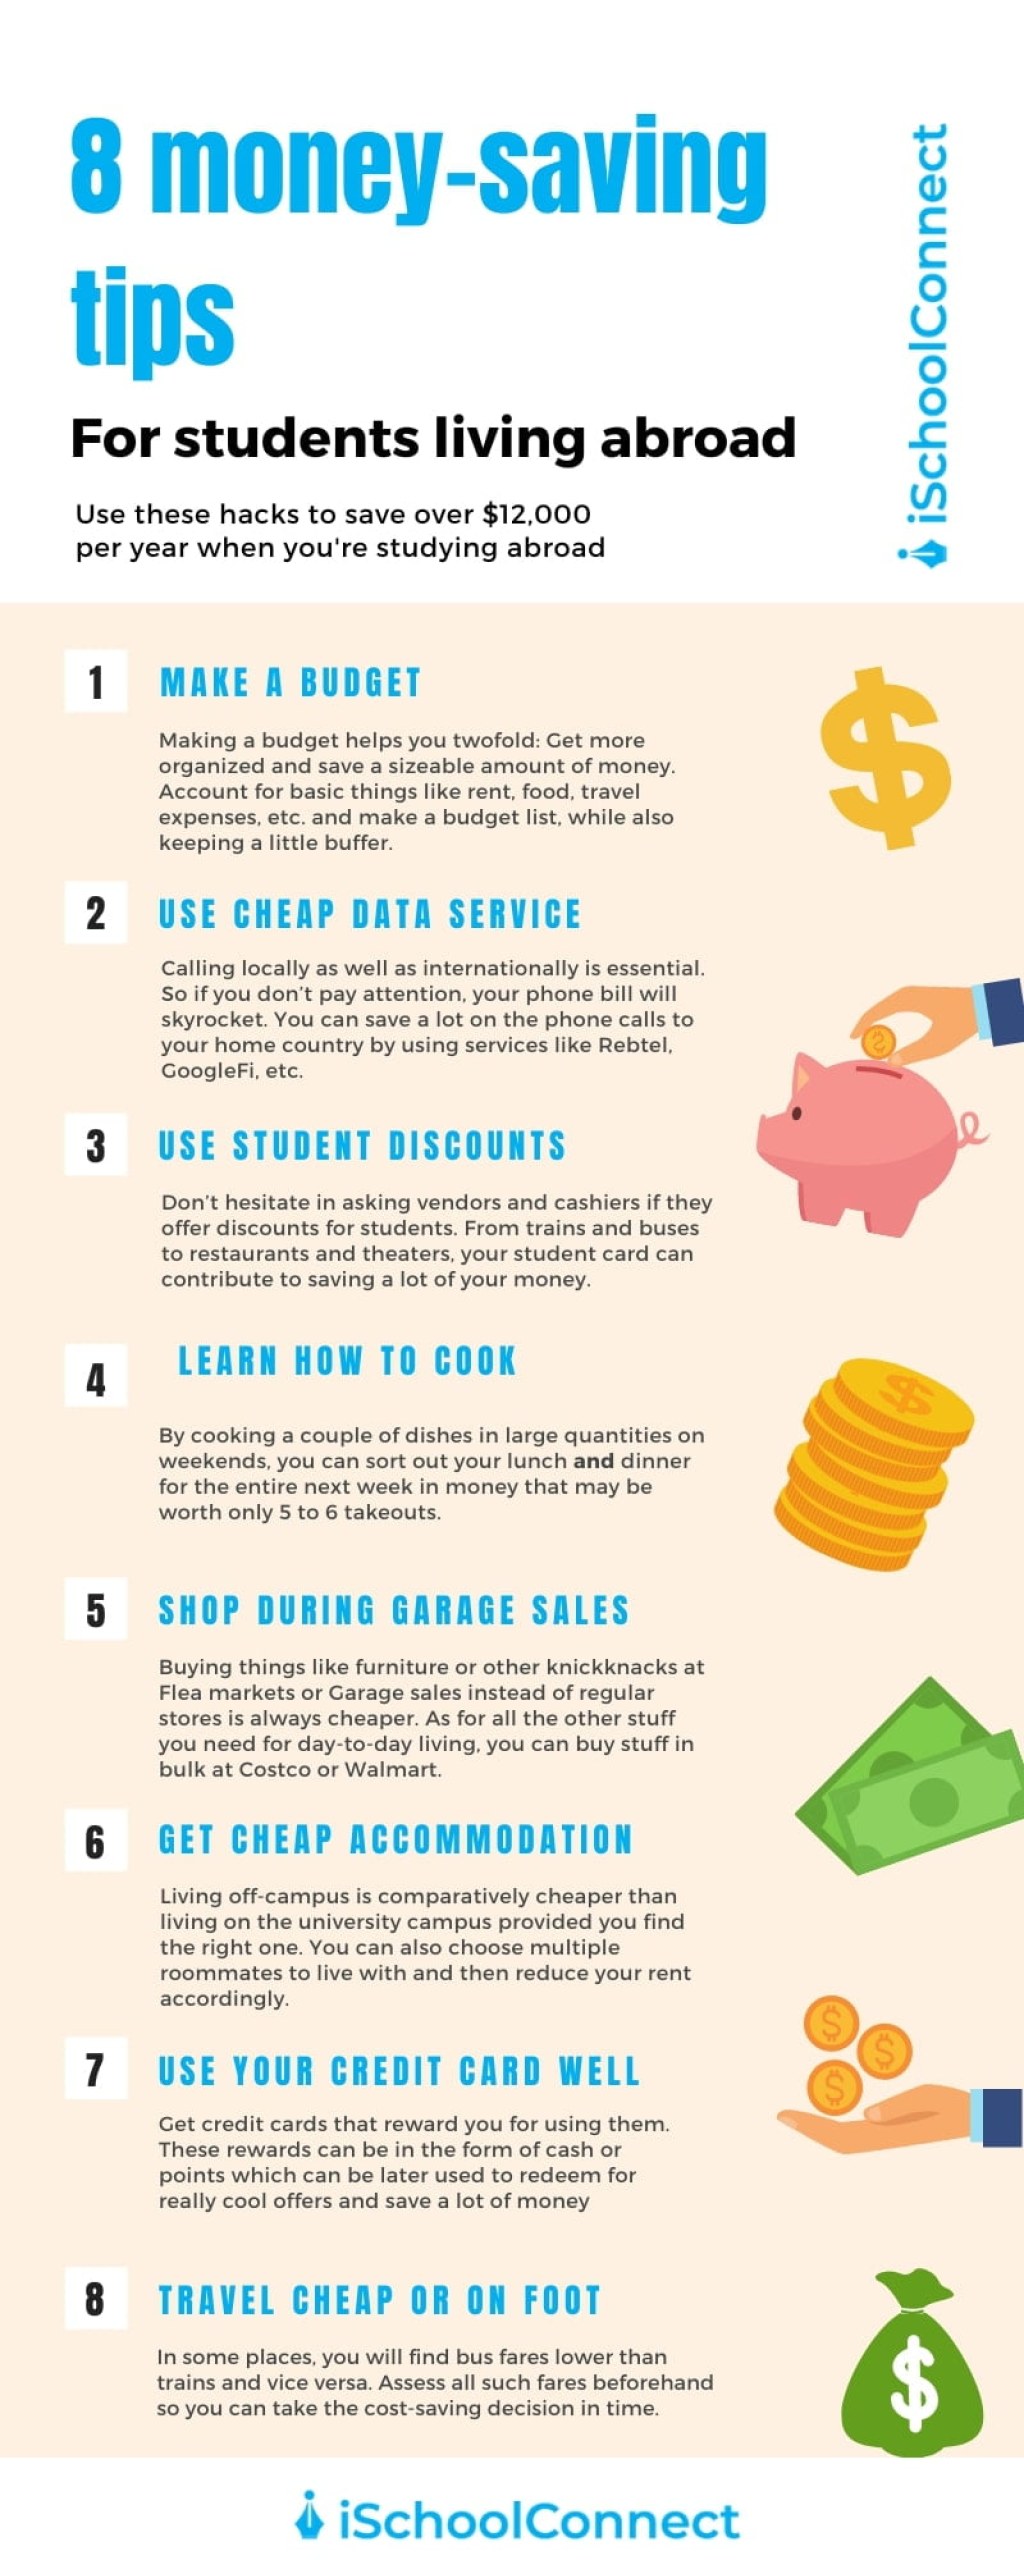 money saving tips tips for students studying abroad